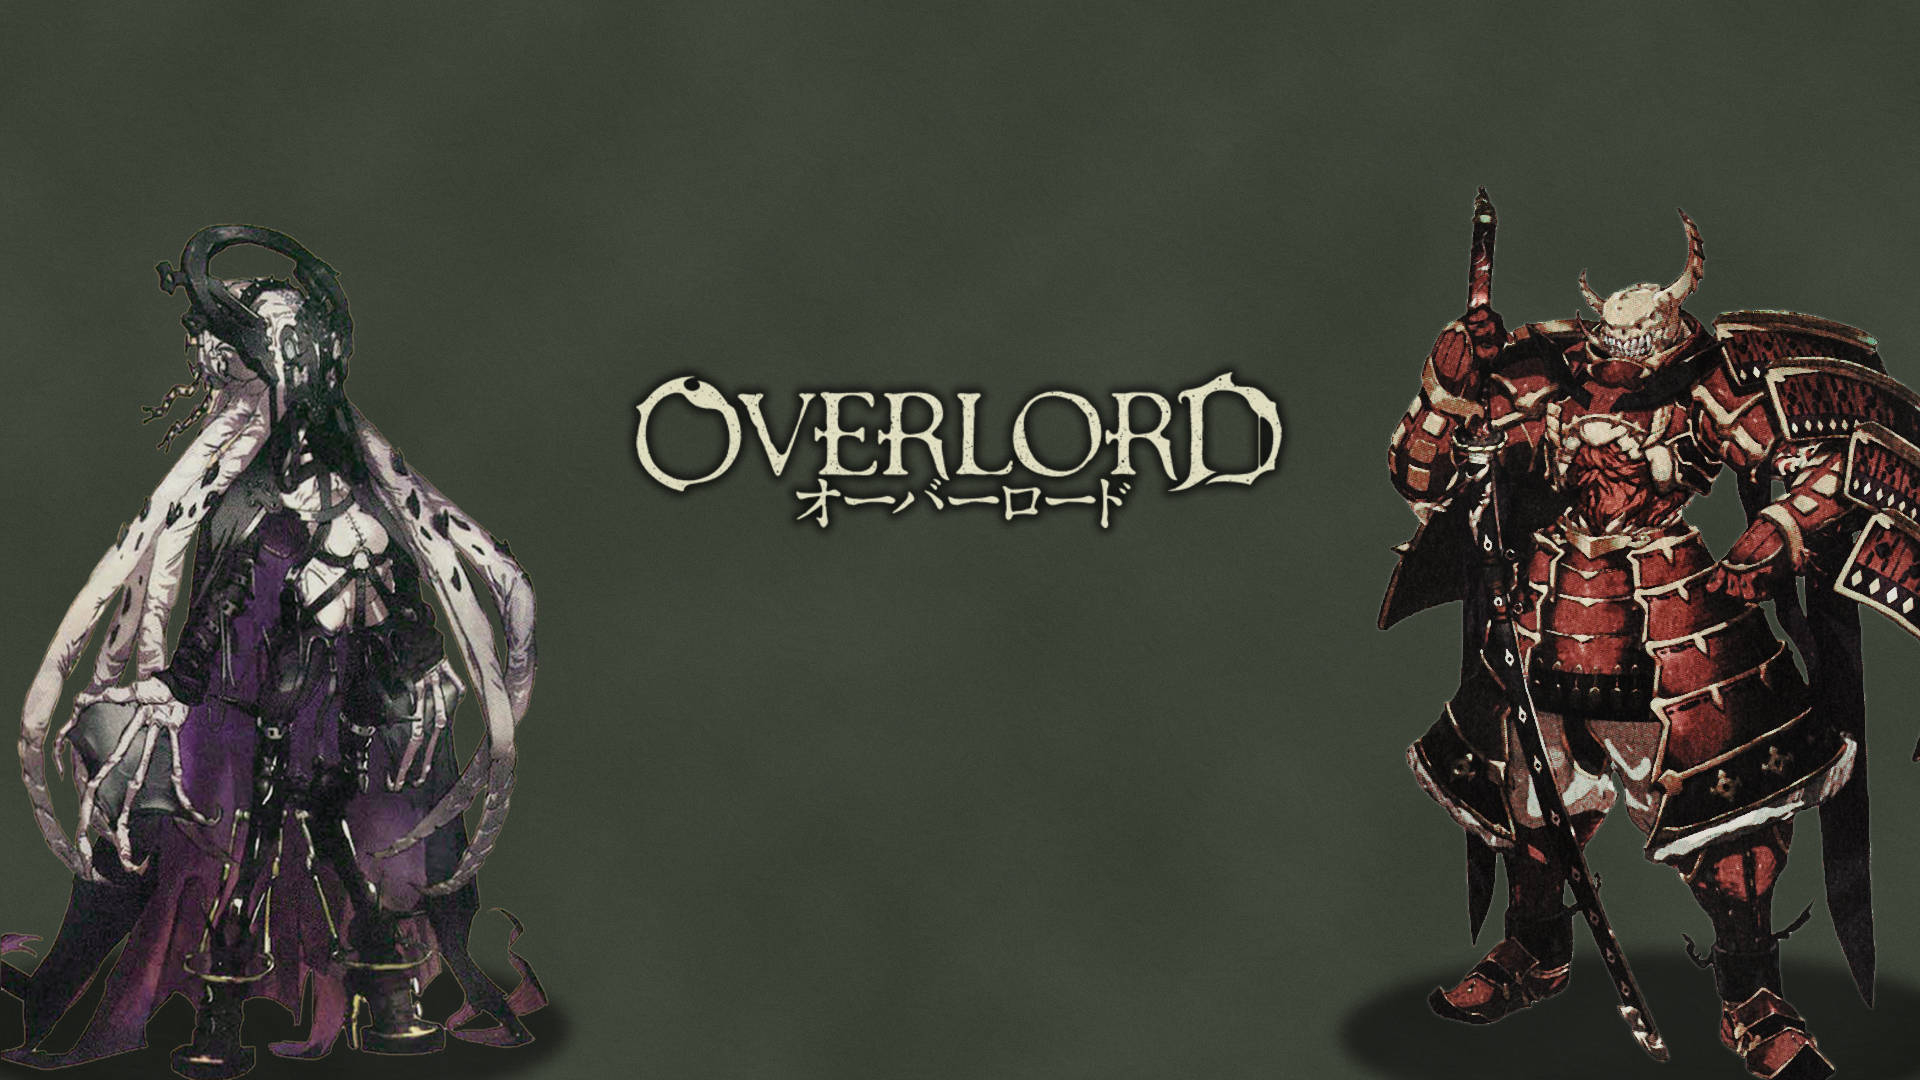 1920x1080 Download Overlord Wallpaper